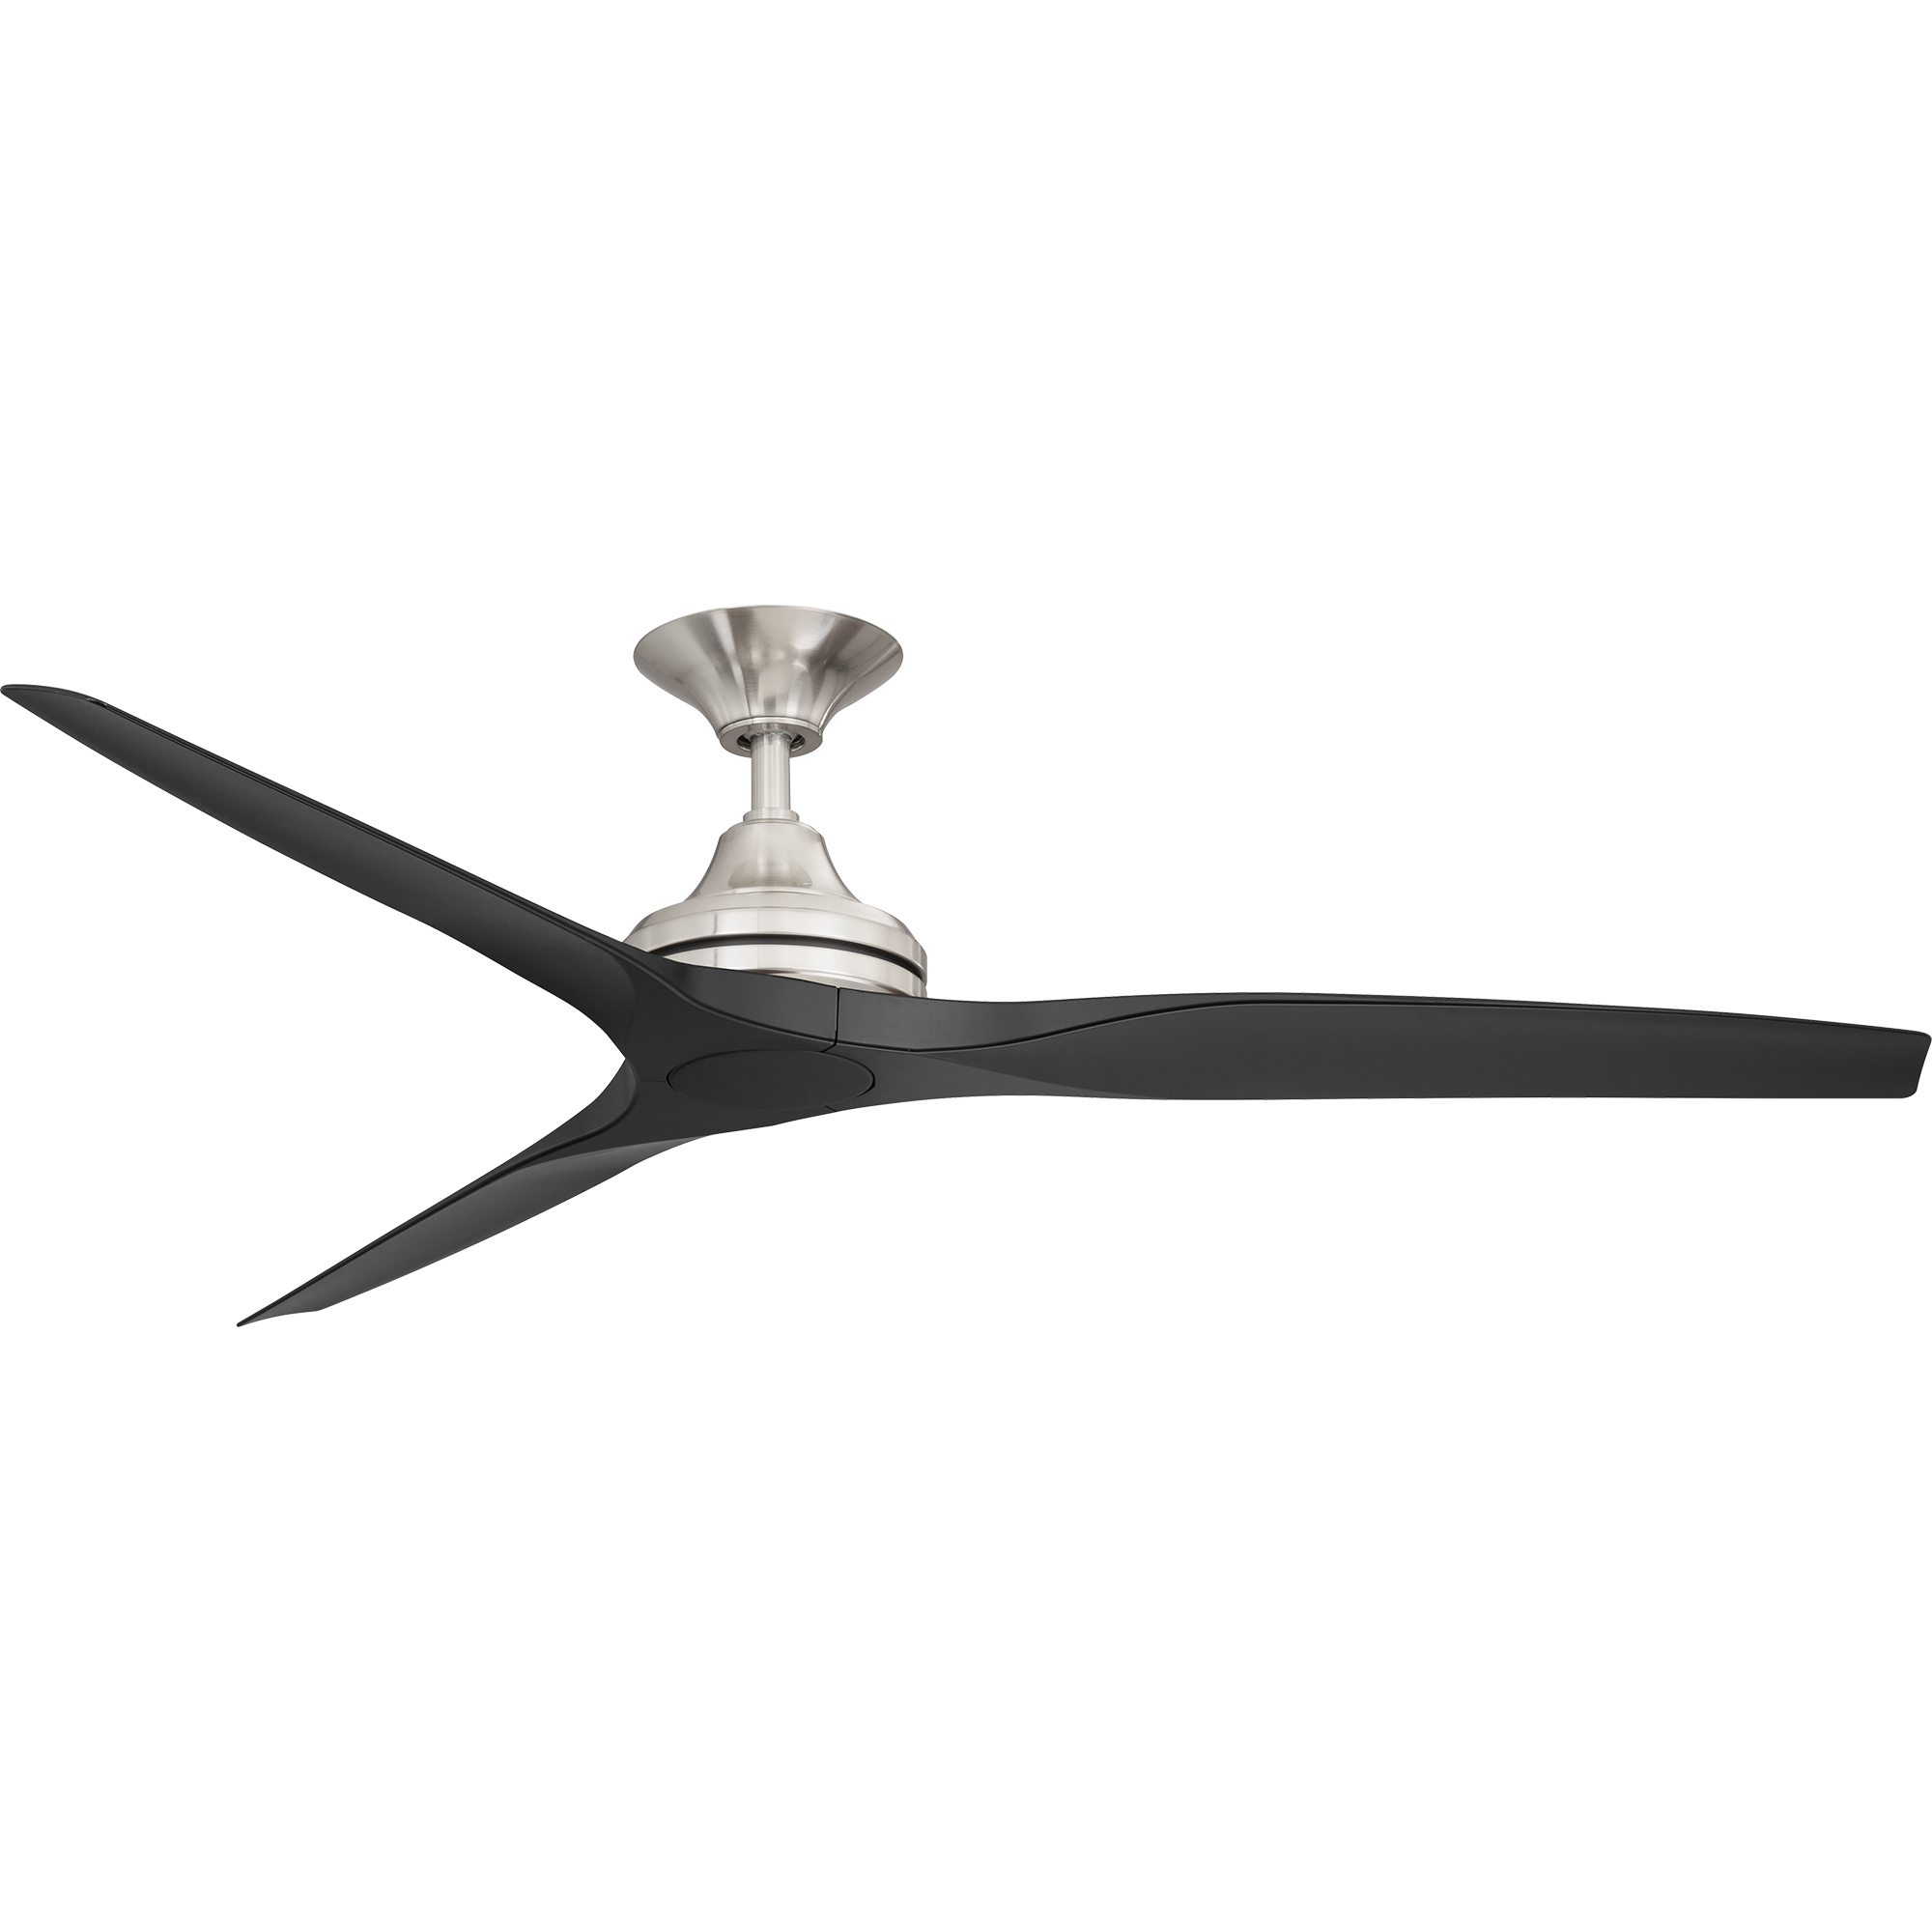 60" Spitfire ceiling fan in Brushed Nickel with Black polymer blades